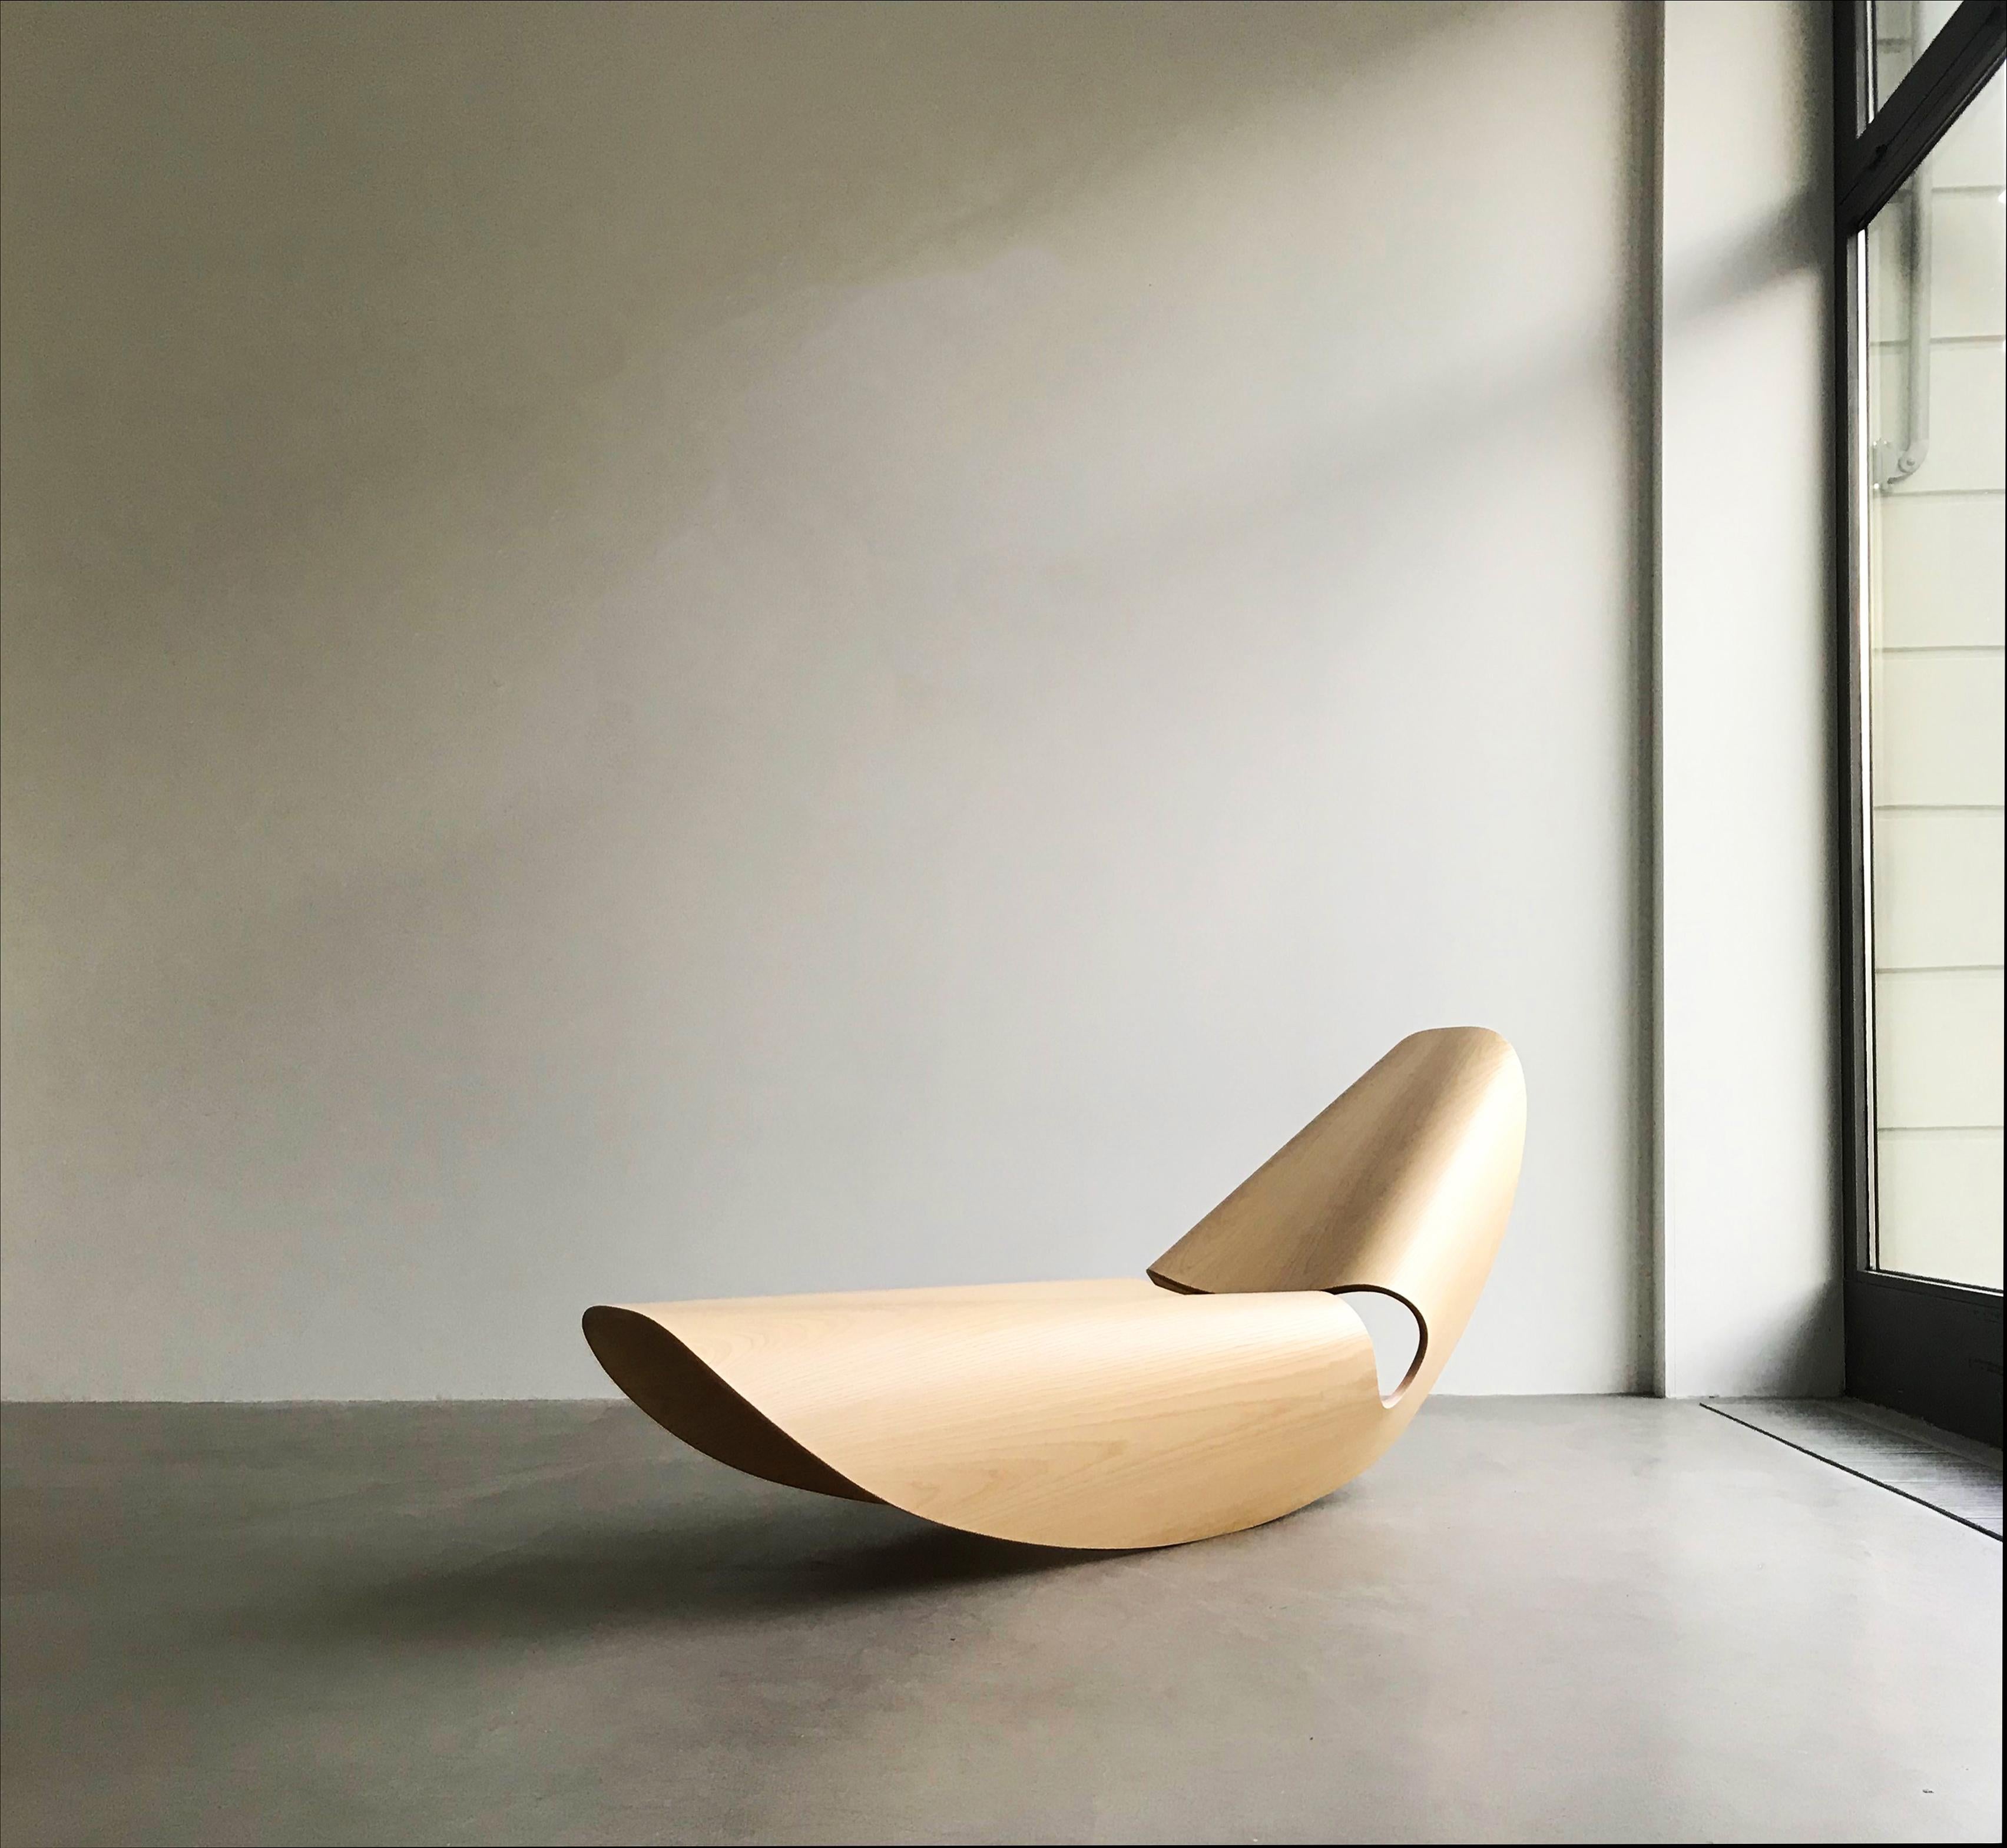 The contemporary Cowrie rocker is an elegant rocking lounger inspired by the concave lines of sea shells. The curvilinear forms are the result of an extensive research and innovation process that bridges the handmade with the digital. Sweeping lines